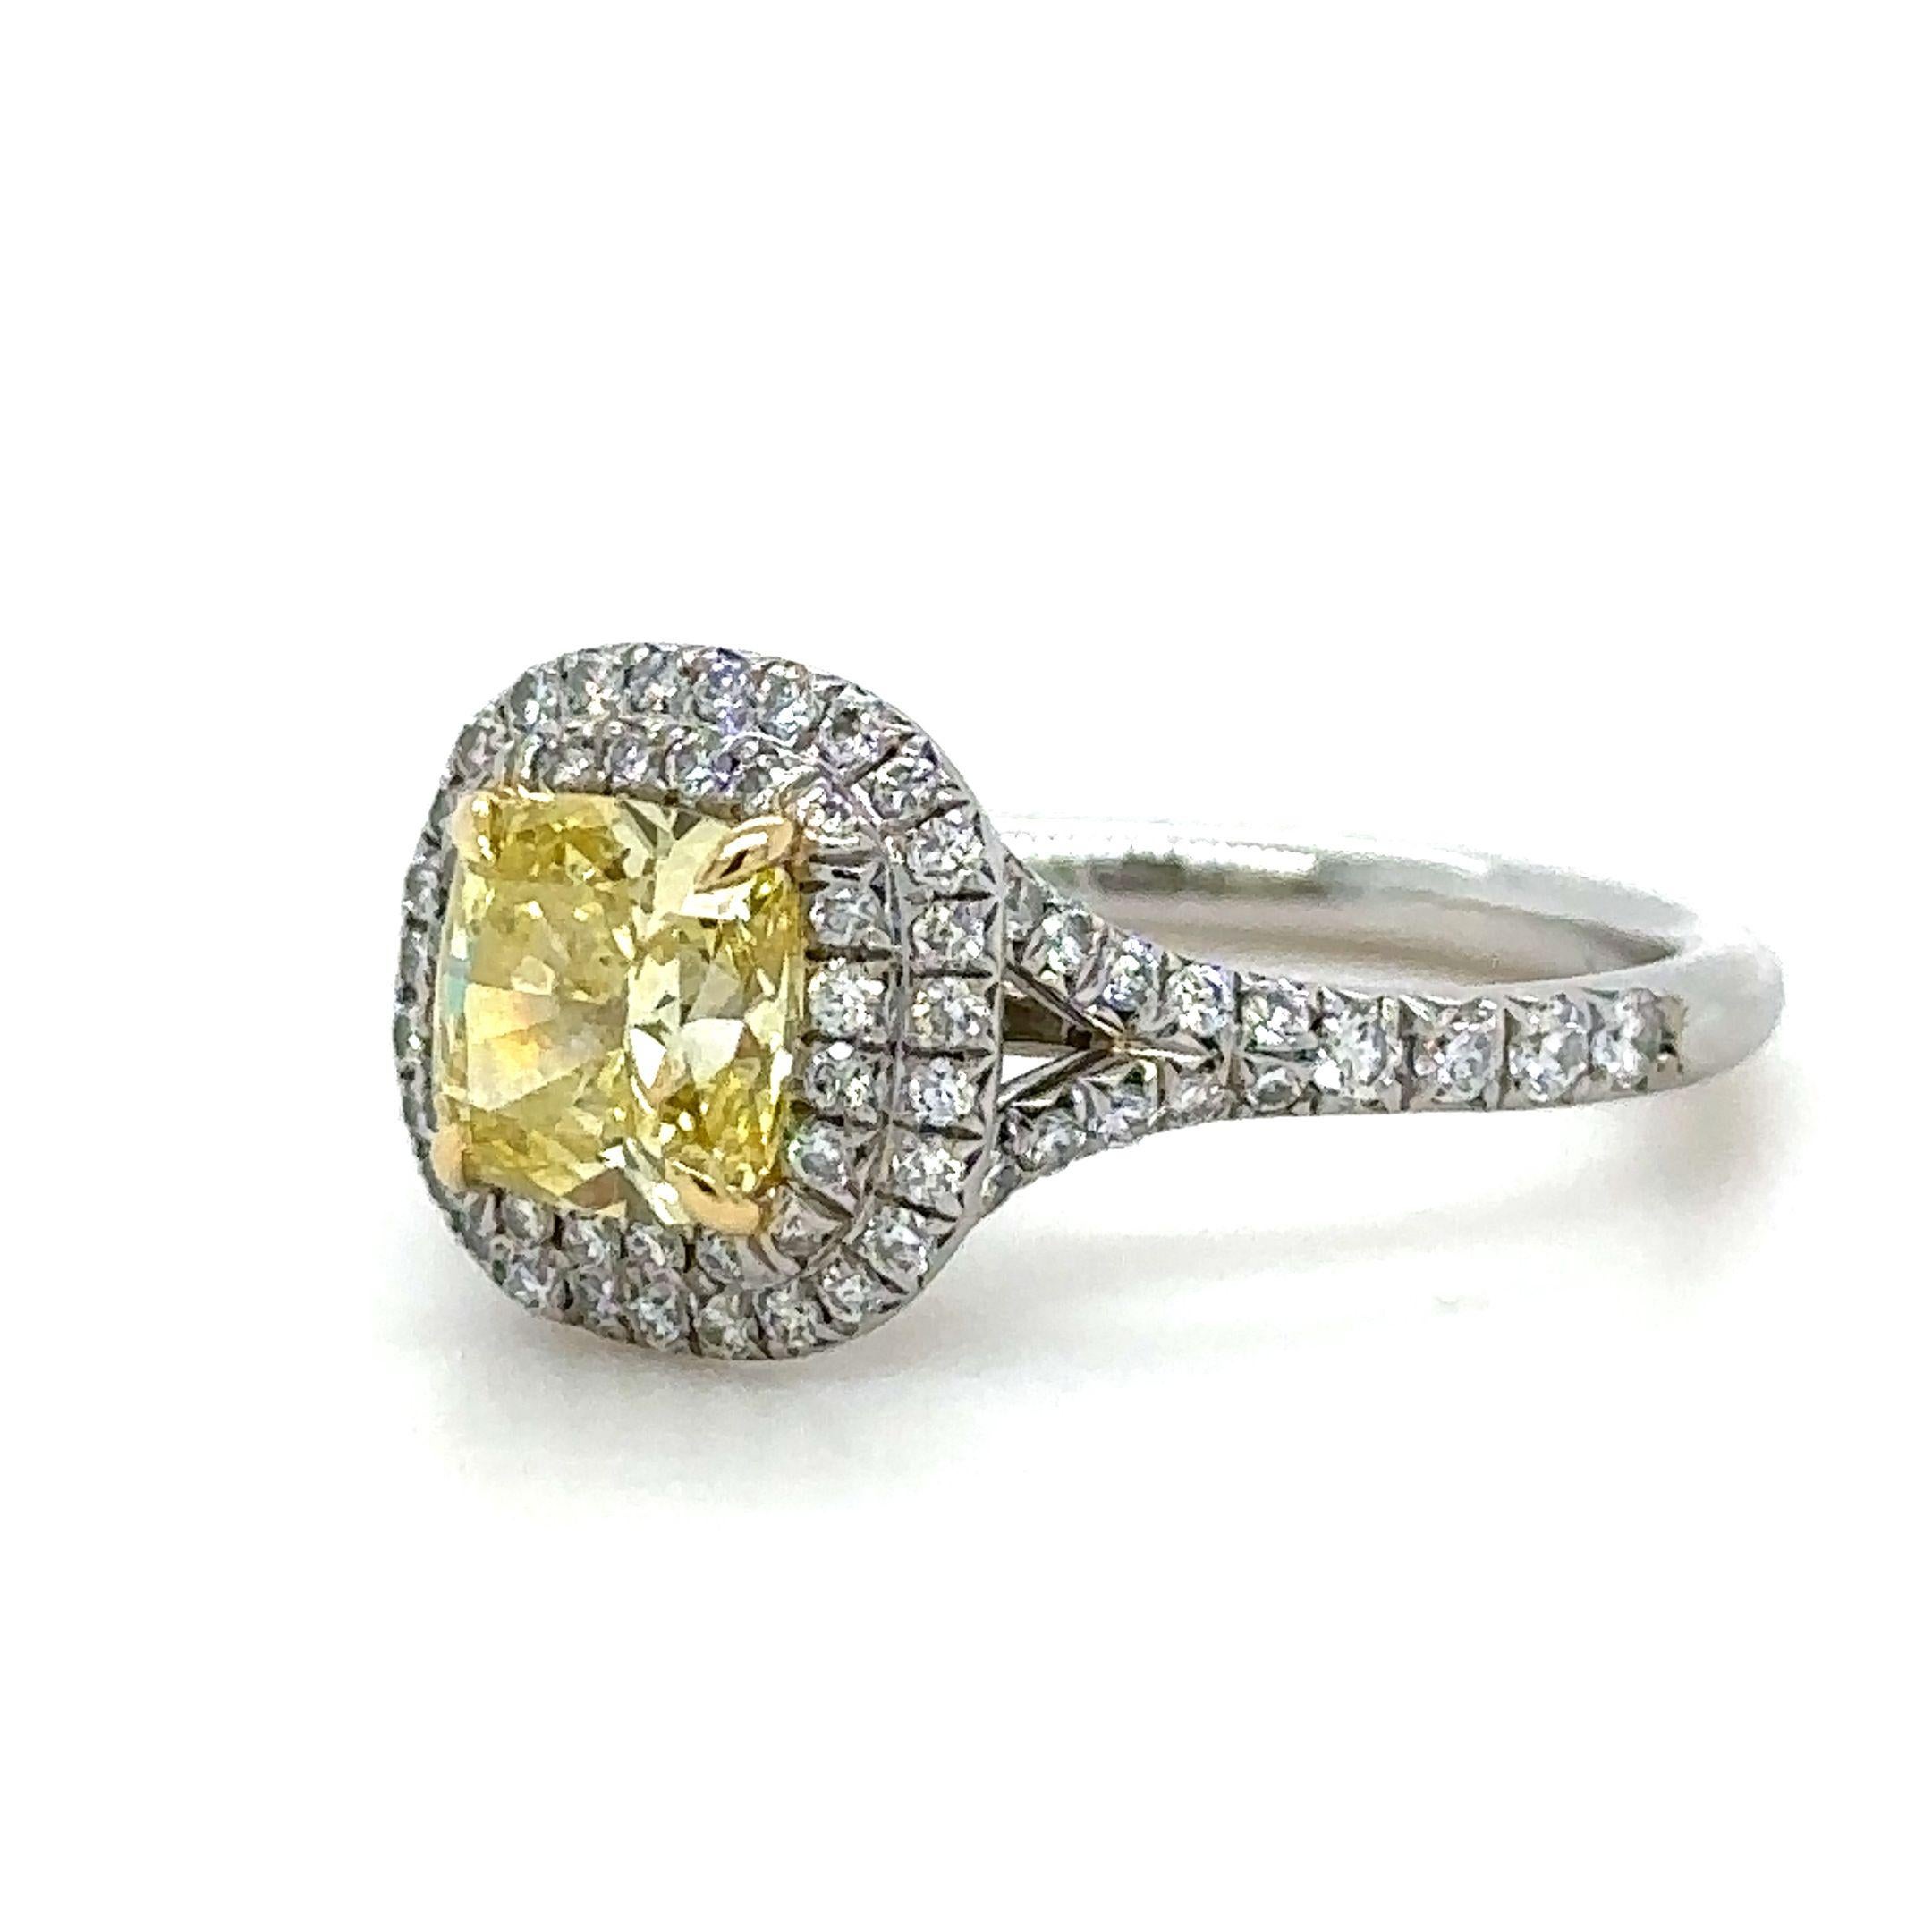 Tiffany Soleste Cushion-cut Fancy Vivid Yellow Diamond Halo Engagement Ring in Platinum with a total carat weight of 1.23ct.

Metal: Platinum PT950
Carat: 1.23ct
Colour: Fancy Vivid Yellow
Clarity: VS2
Cut: Modified Brilliant - Cushion
Weight: 8